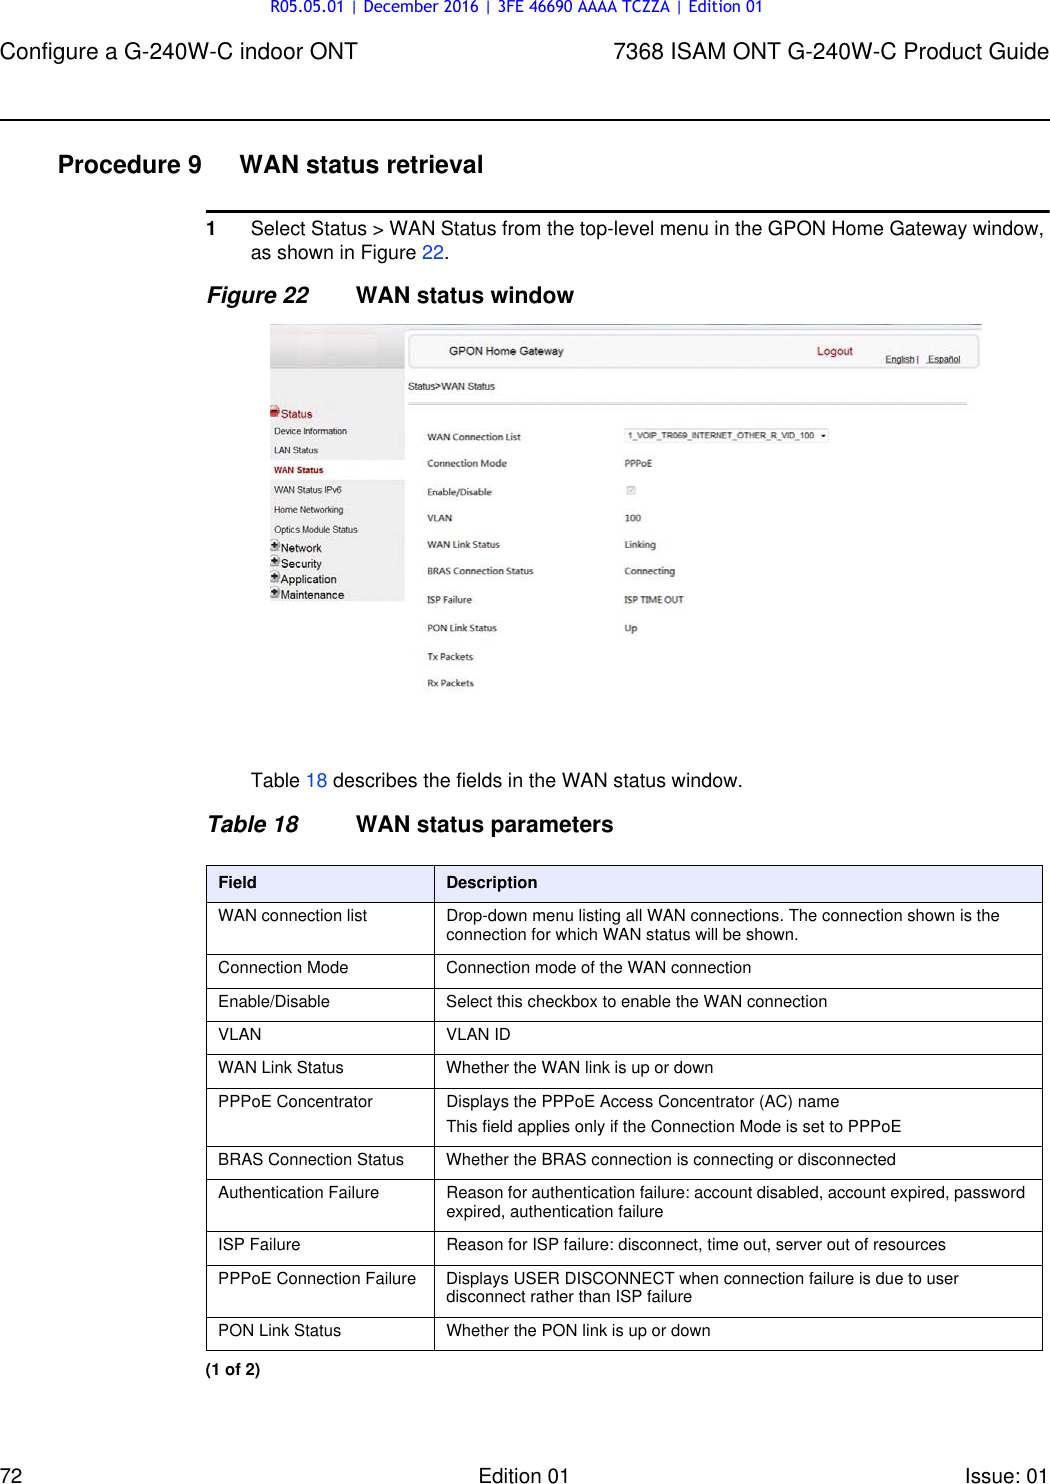 Page 72 of Nokia Bell G240W-C GPON ONU User Manual 7368 ISAM ONT G 240W B Product Guide